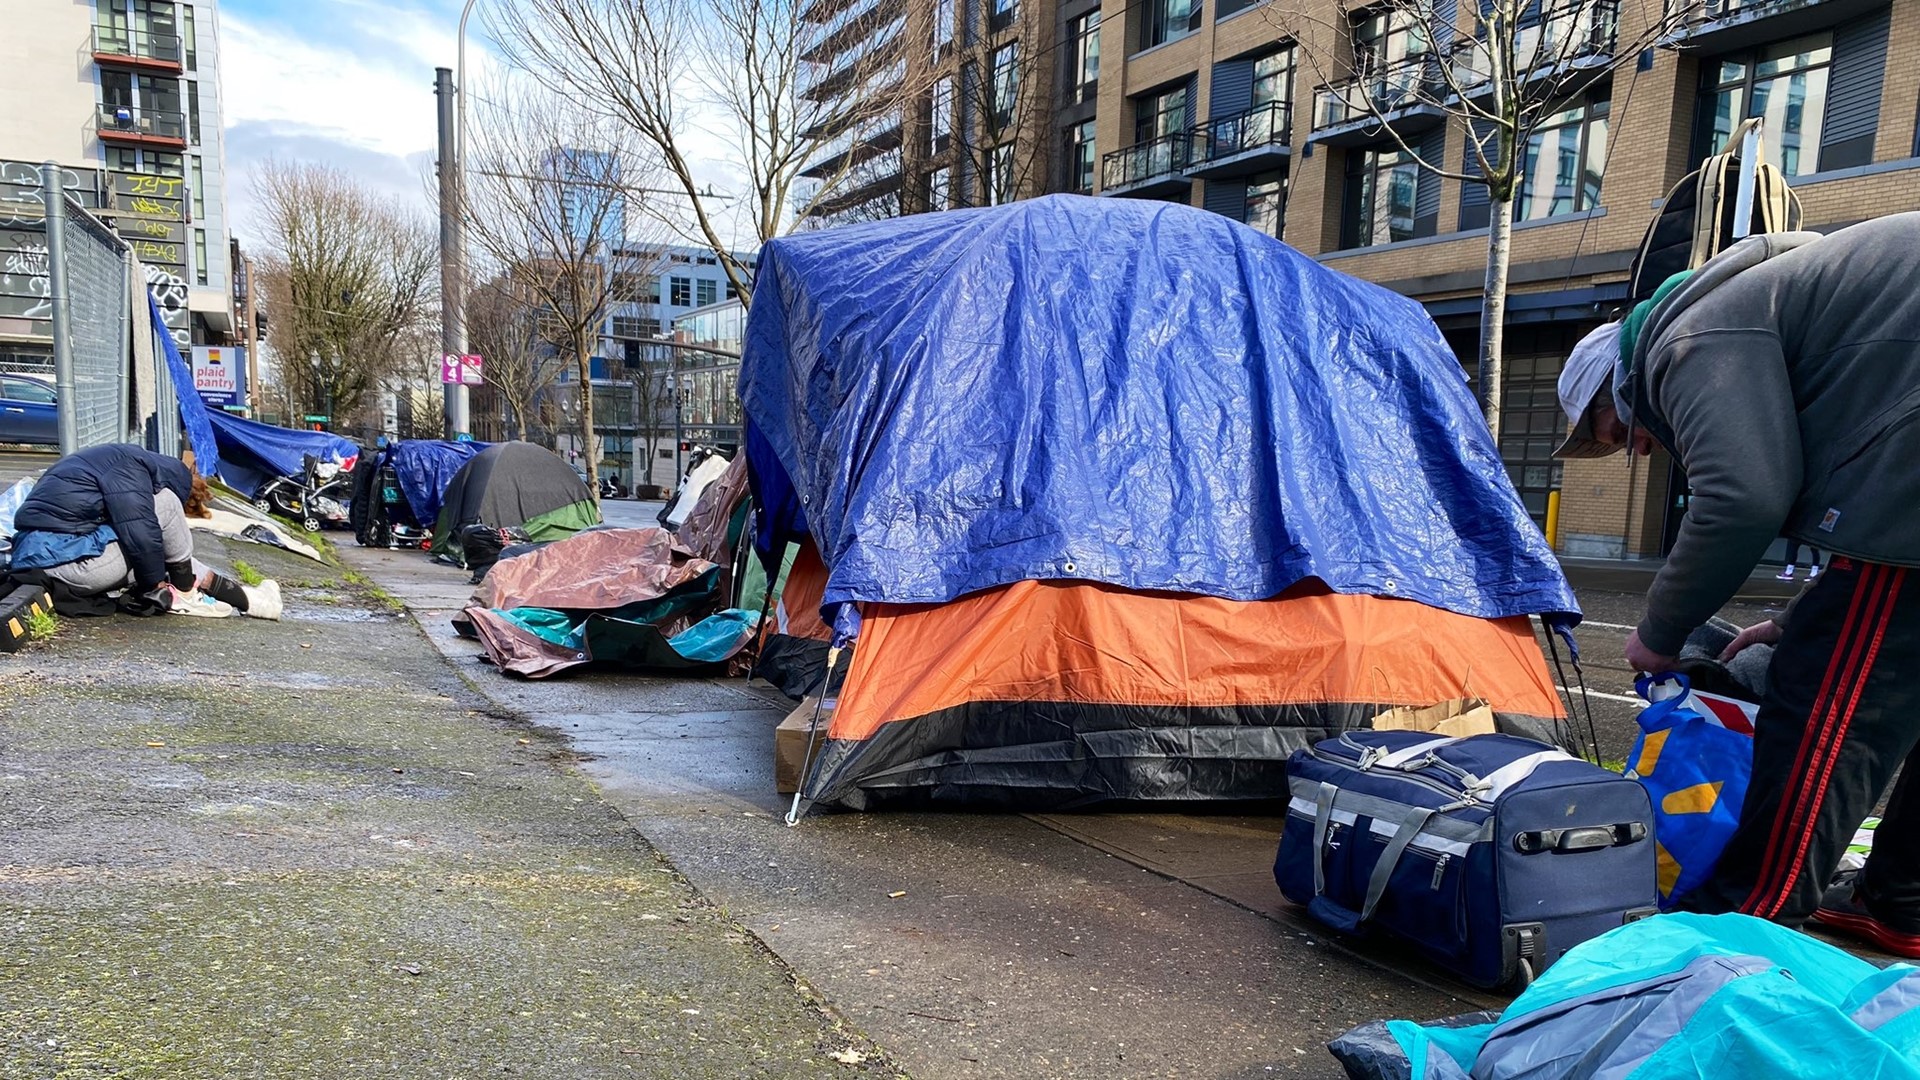 Gonzalez, a Portland mayoral candidate, is proposing an increase in fines and a ban on all camping on public property.